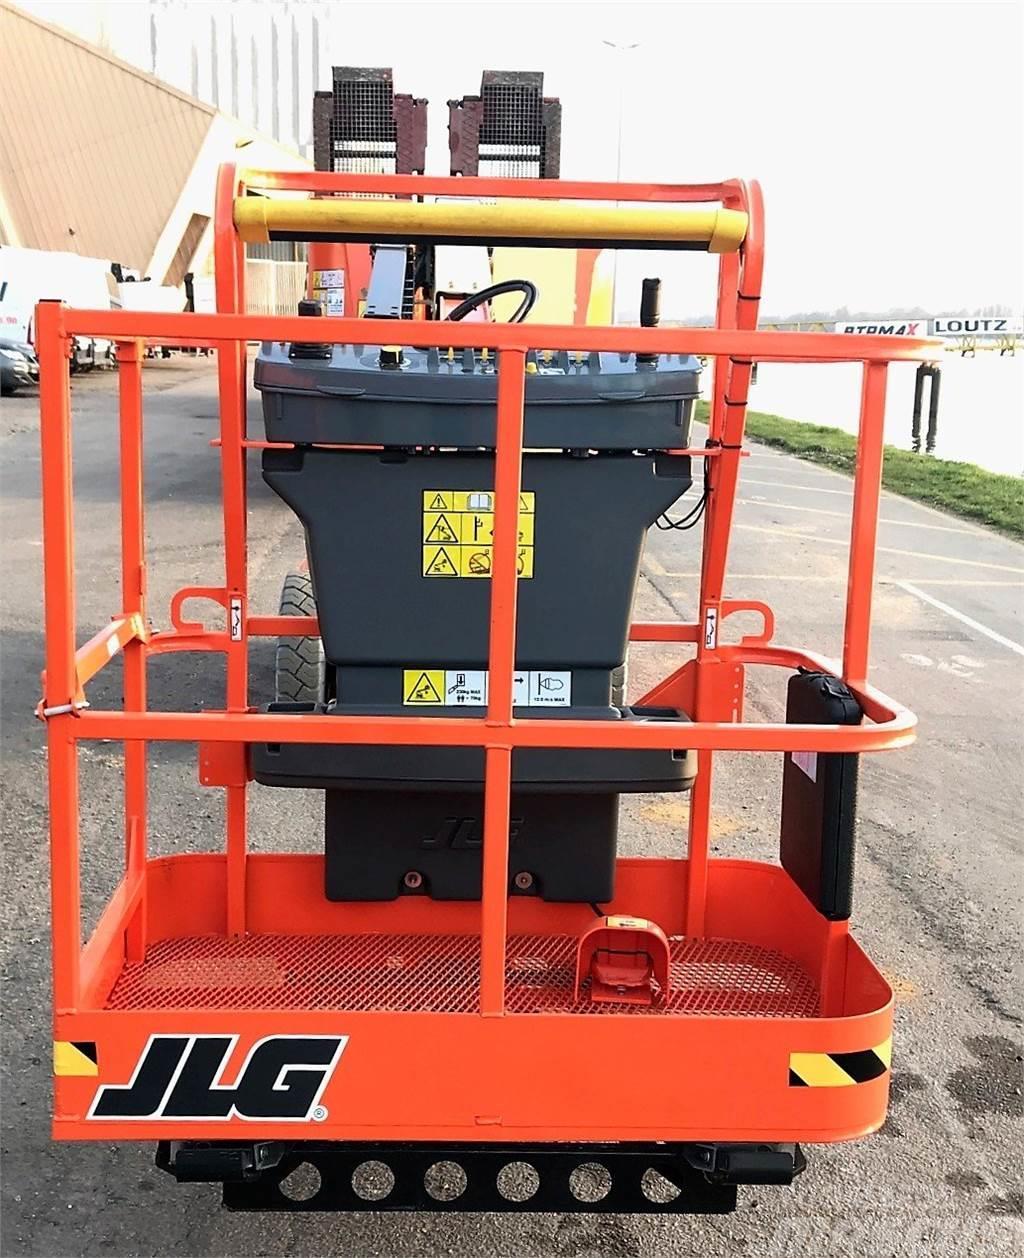 JLG E300AJ Other lifts and platforms